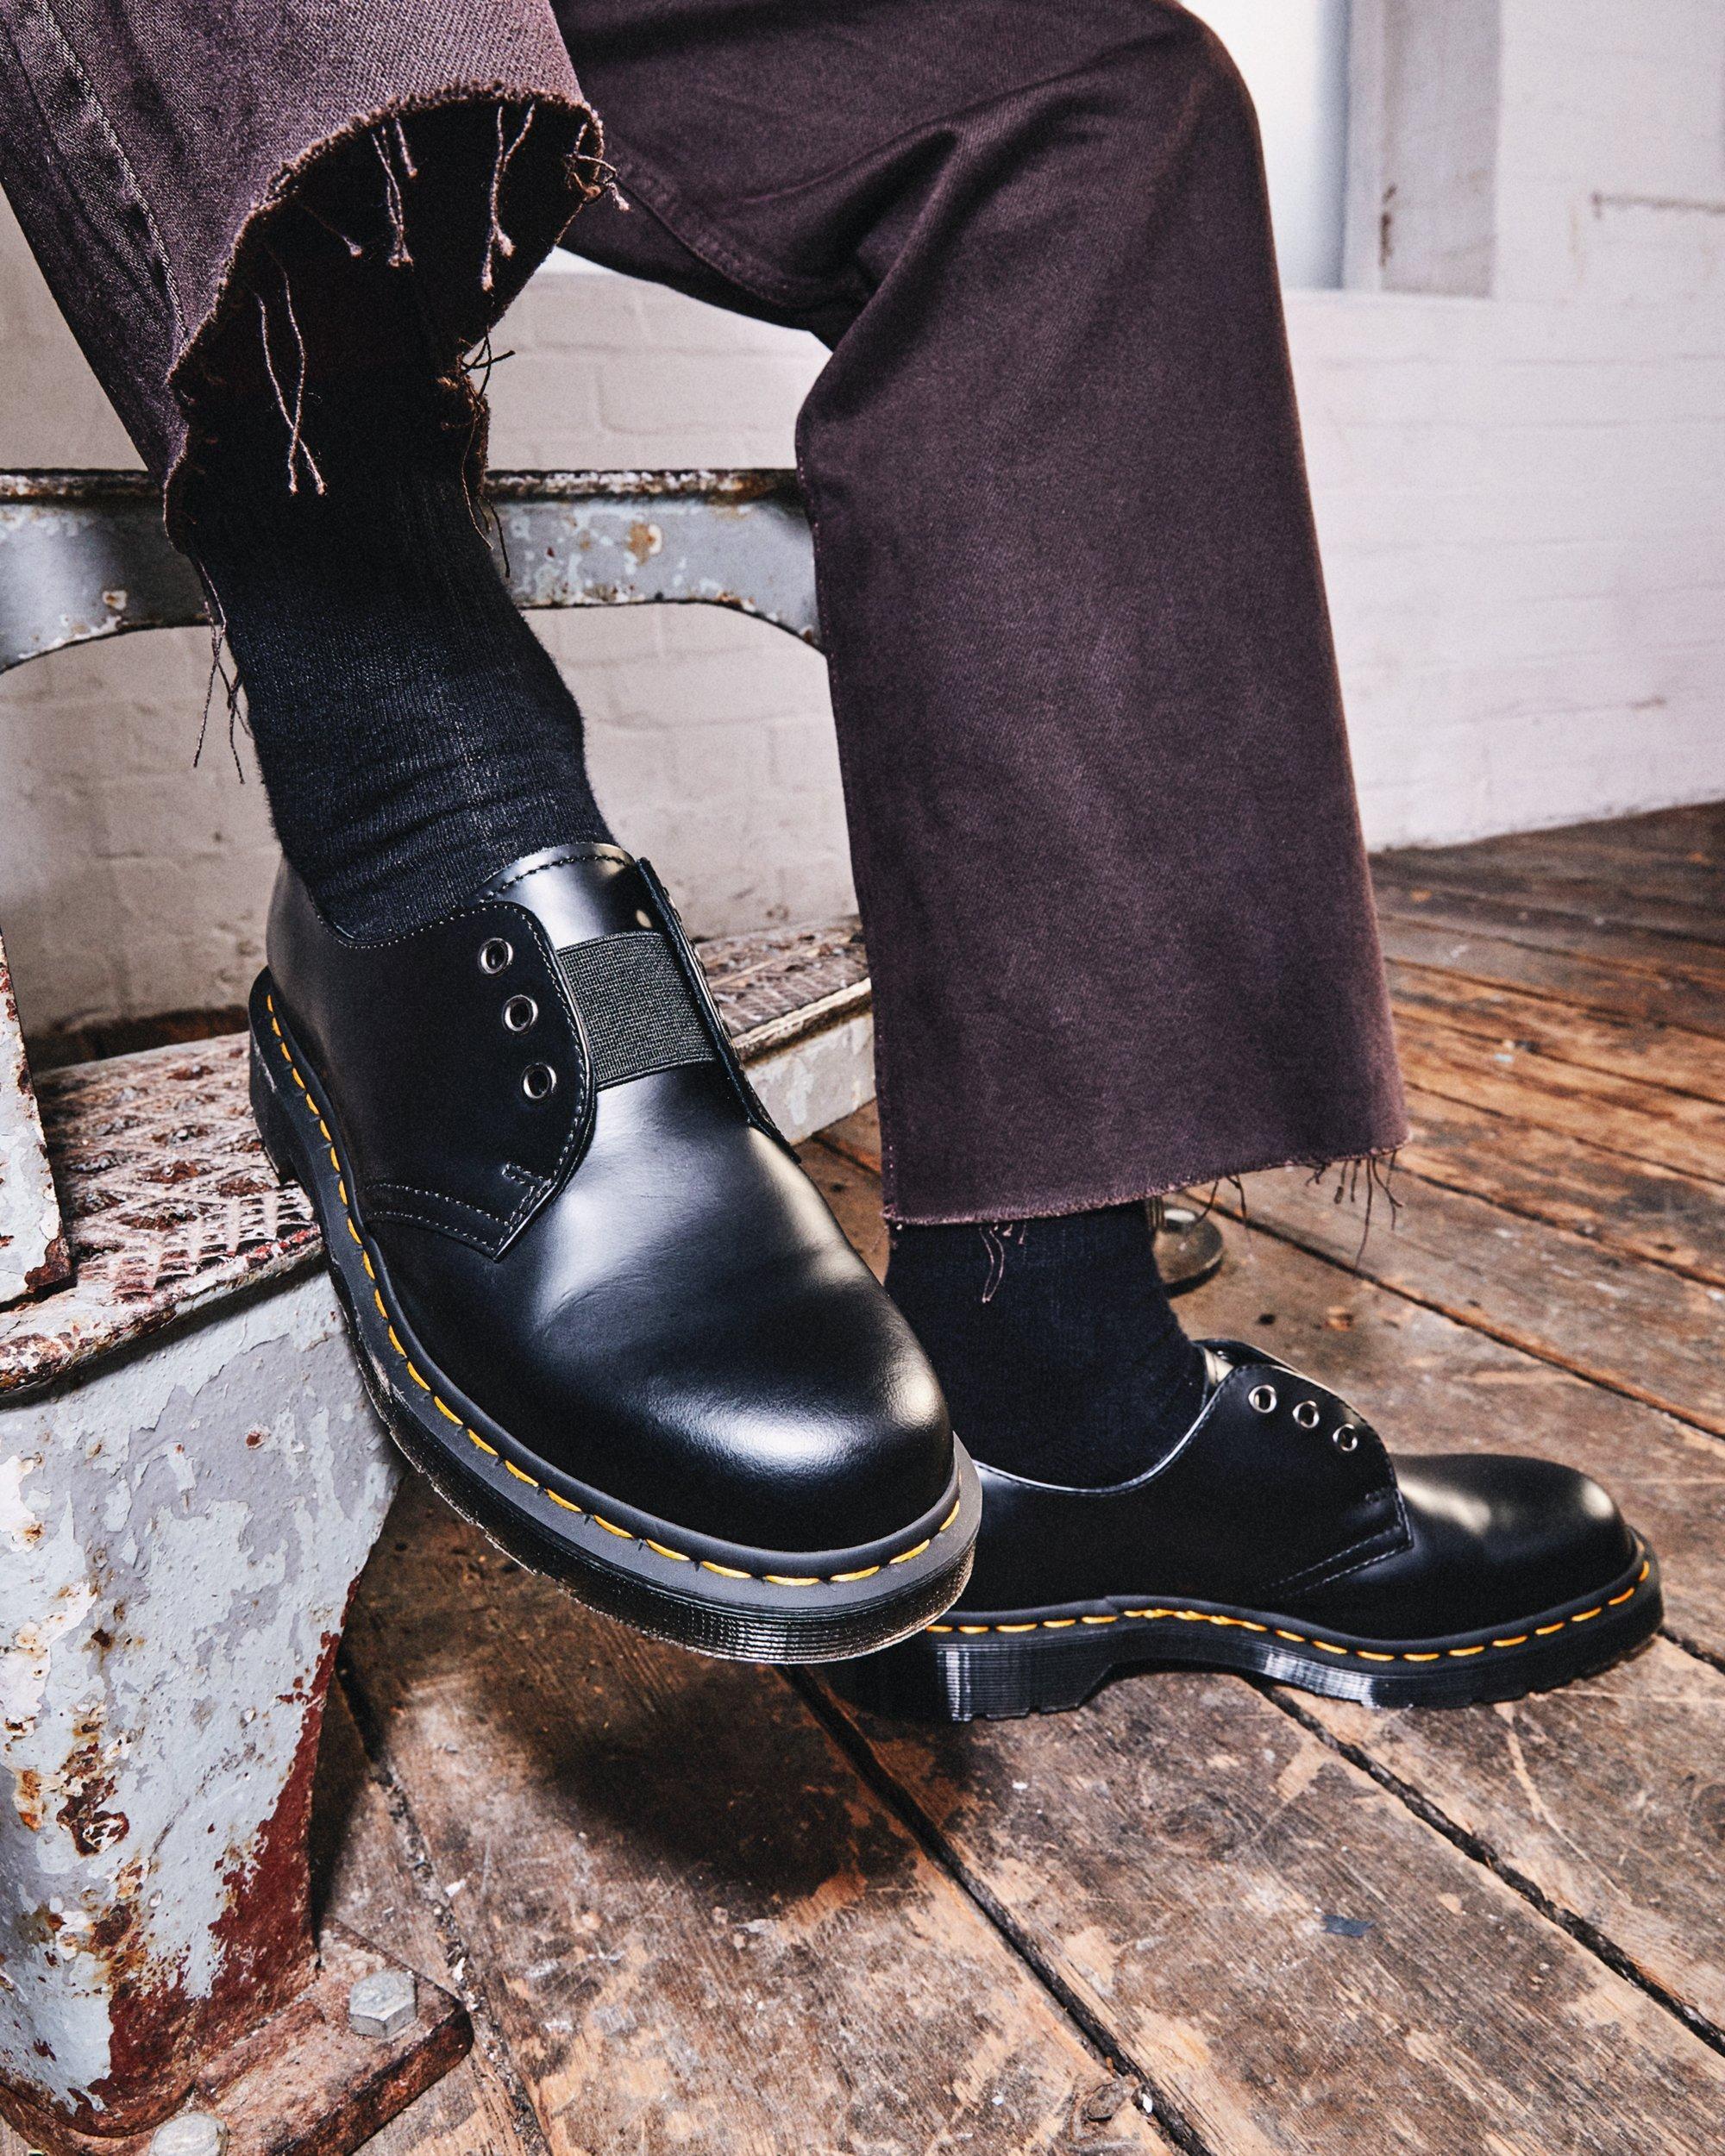 Dr. Martens 1461 Elastic Smooth Leather Oxford Shoes in Black | Lyst